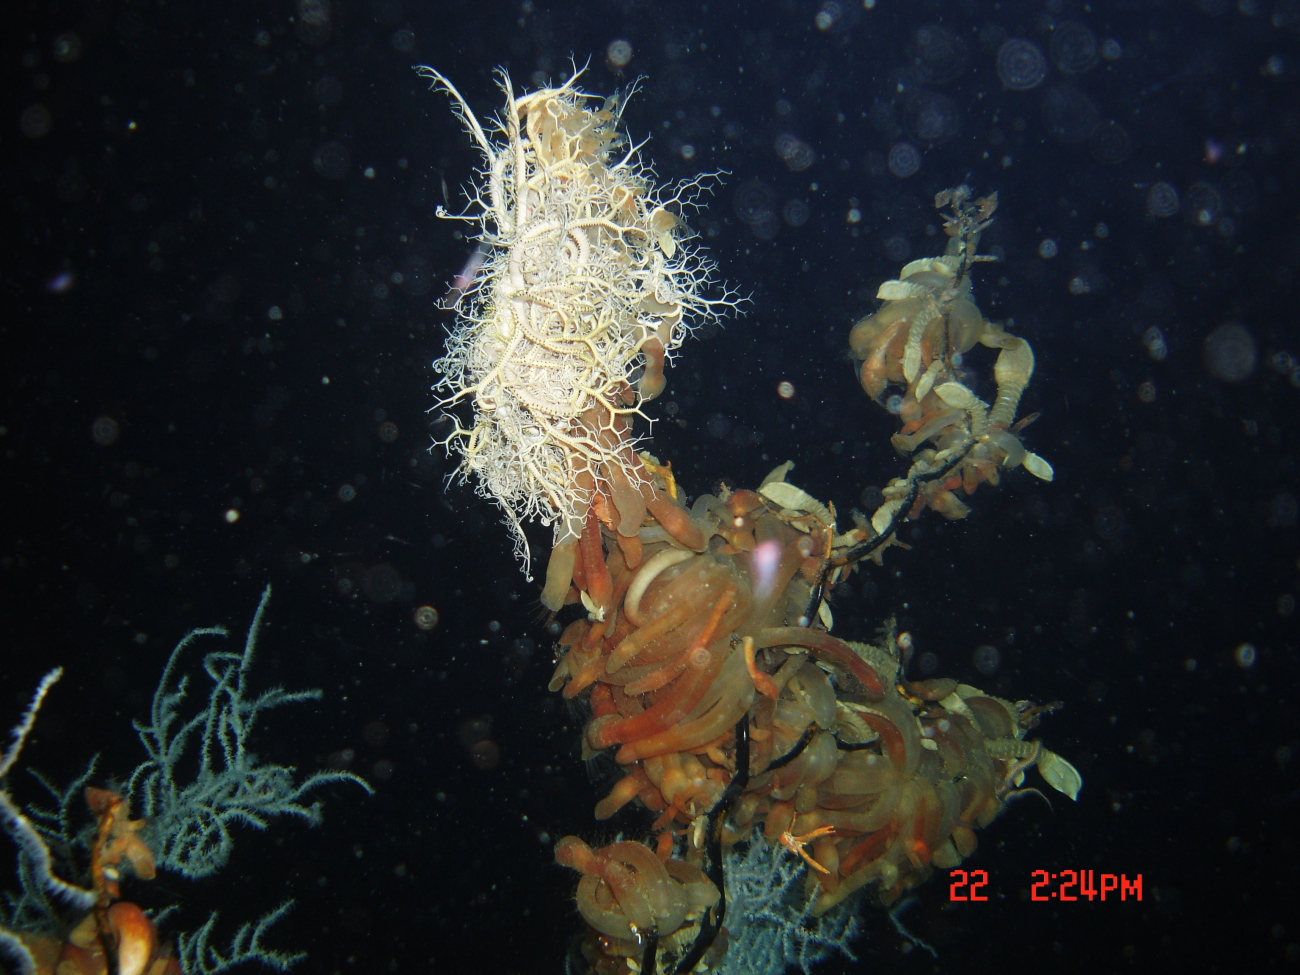 A large basket star on an agglomeration of gooseneck barnacles at the top of a white black coral bush (Leiopathes glaberrima)